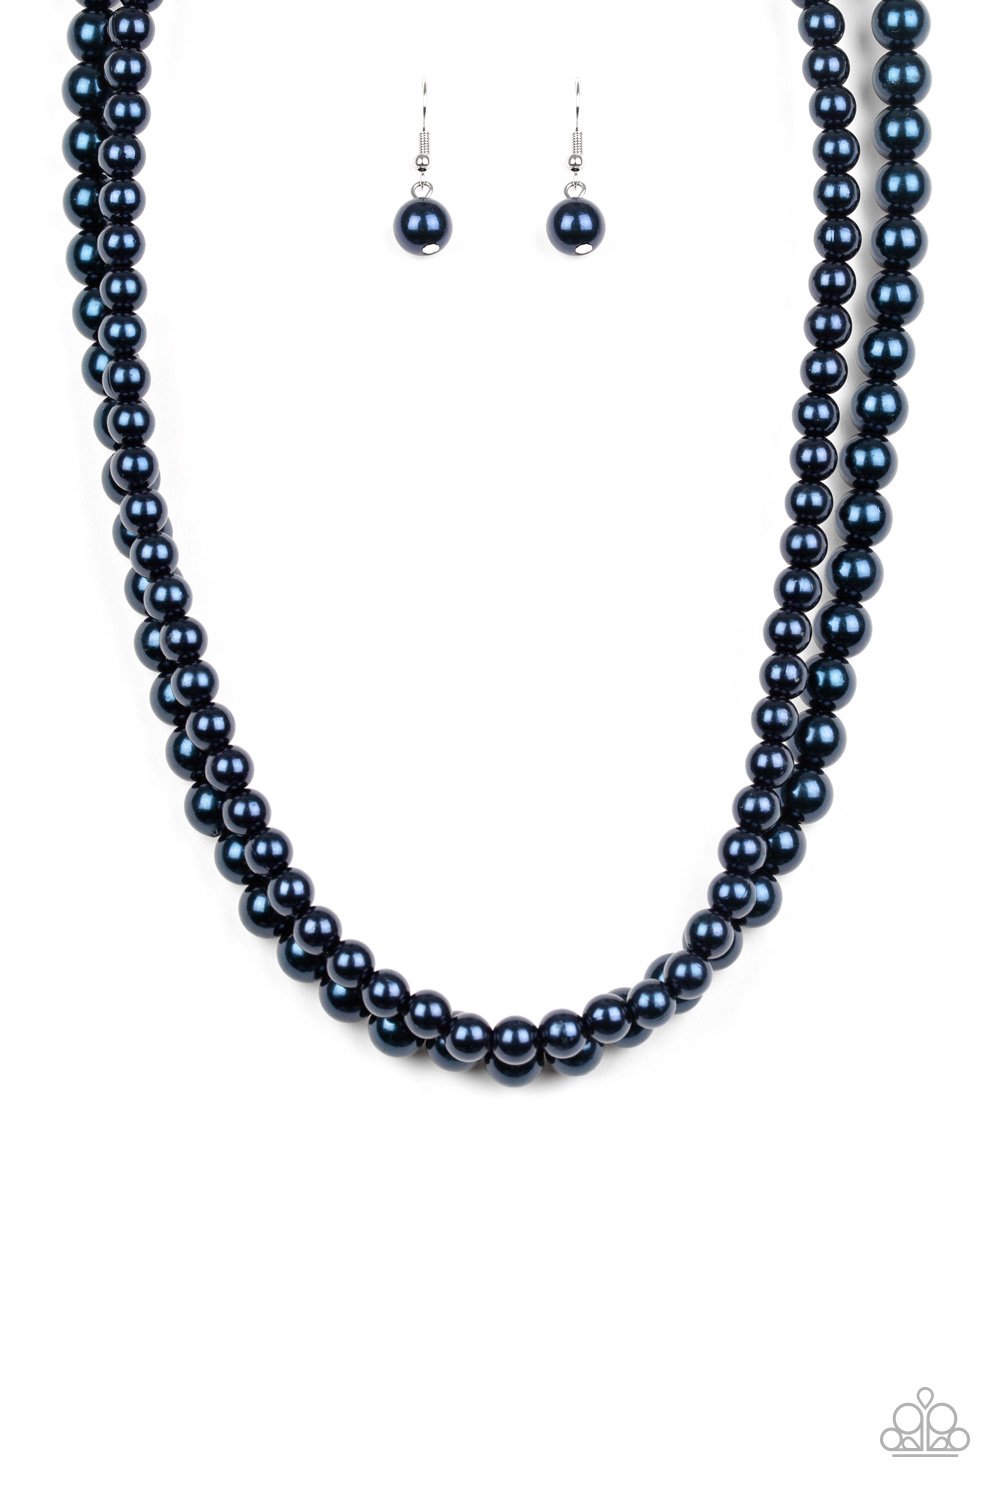 Woman Of The Century - Blue Necklace